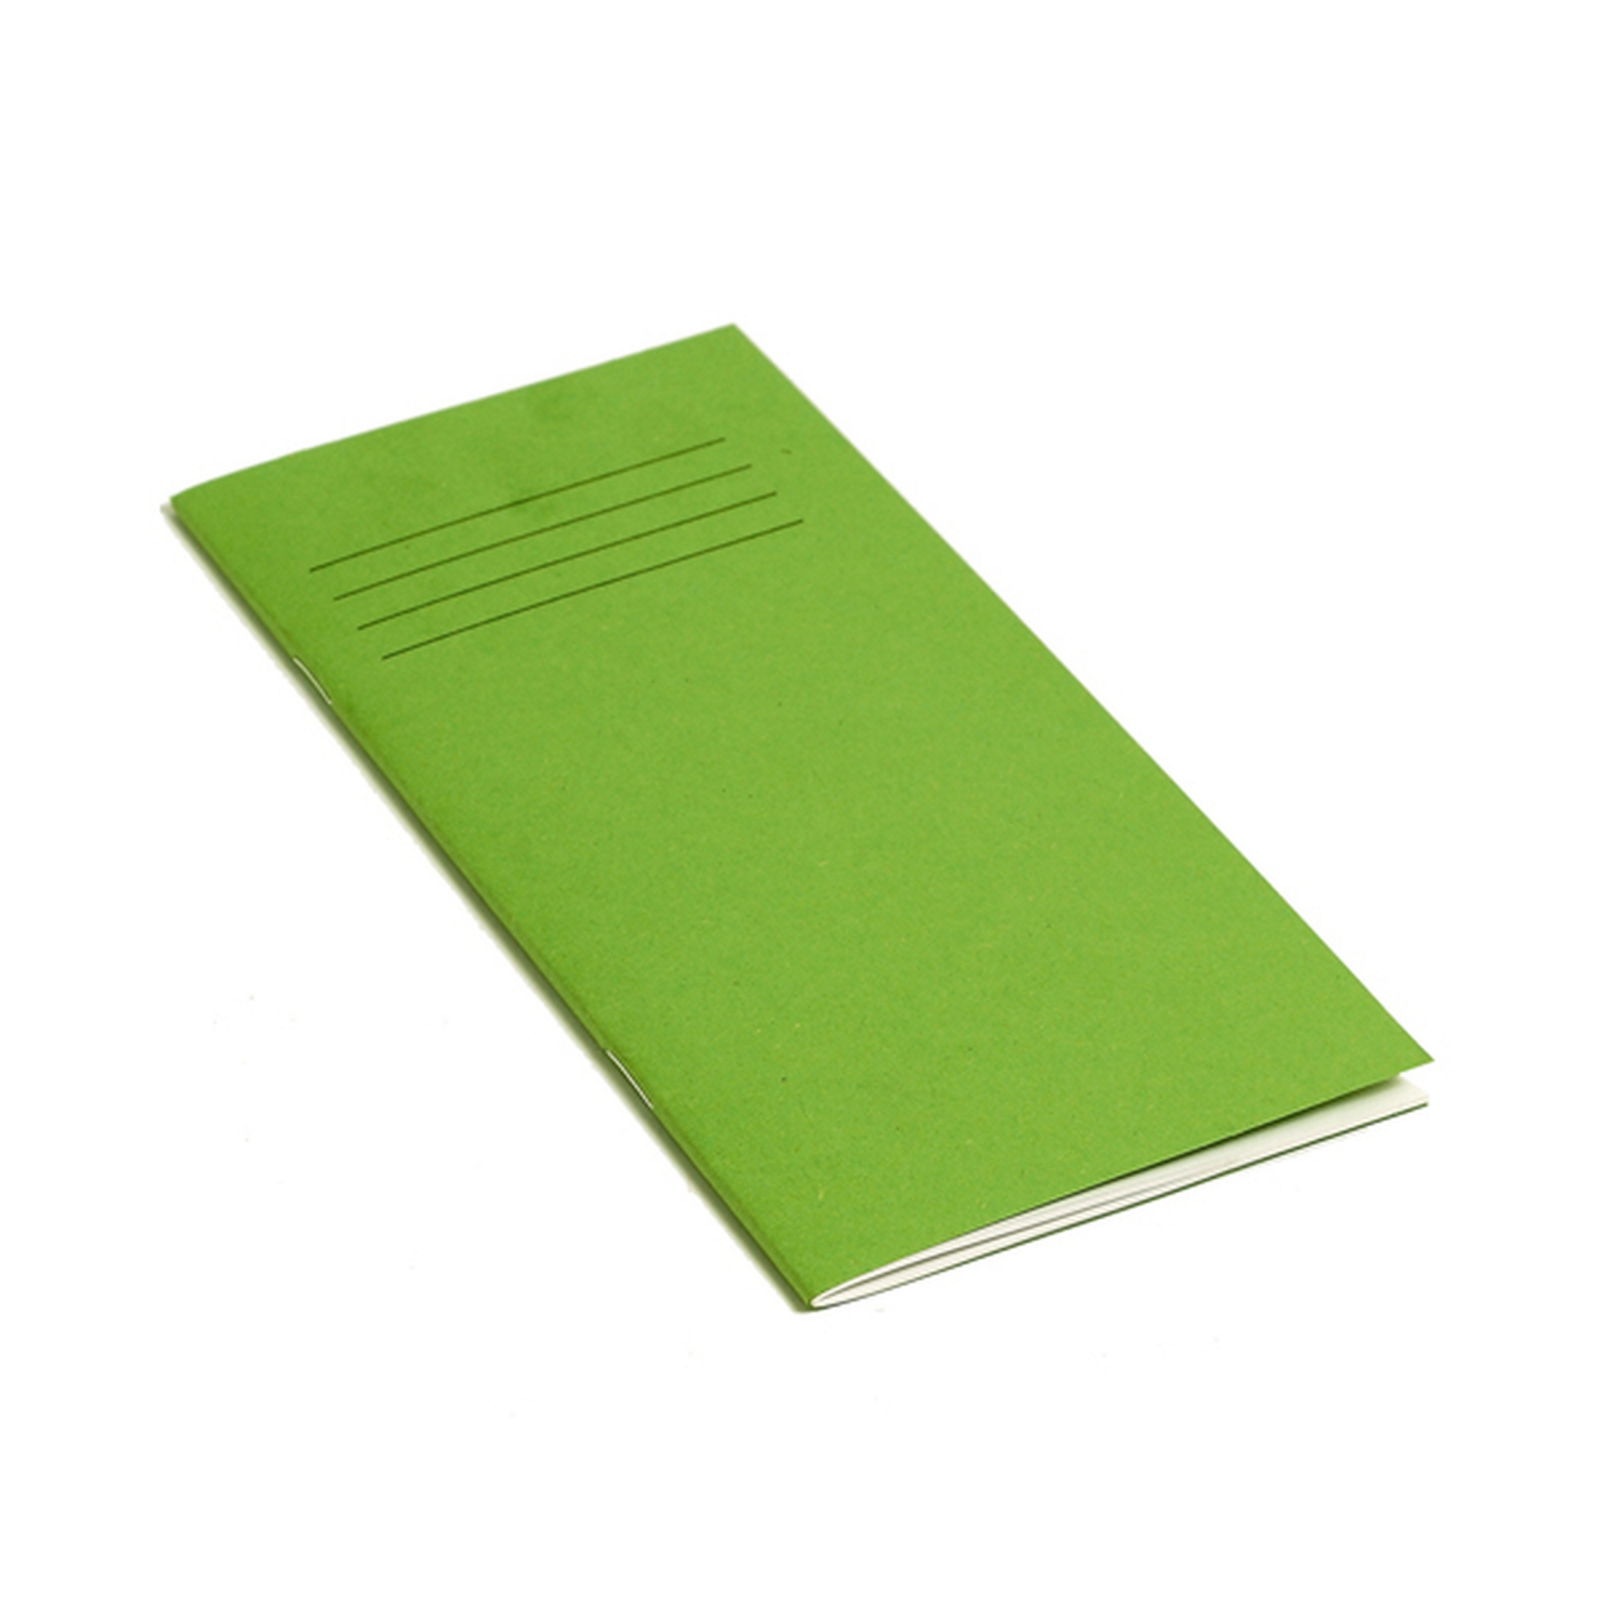 8 x 4"/200 x 100mm Green Cover Plain Page Vocabulary Book - 32 Pages - Pack of 100